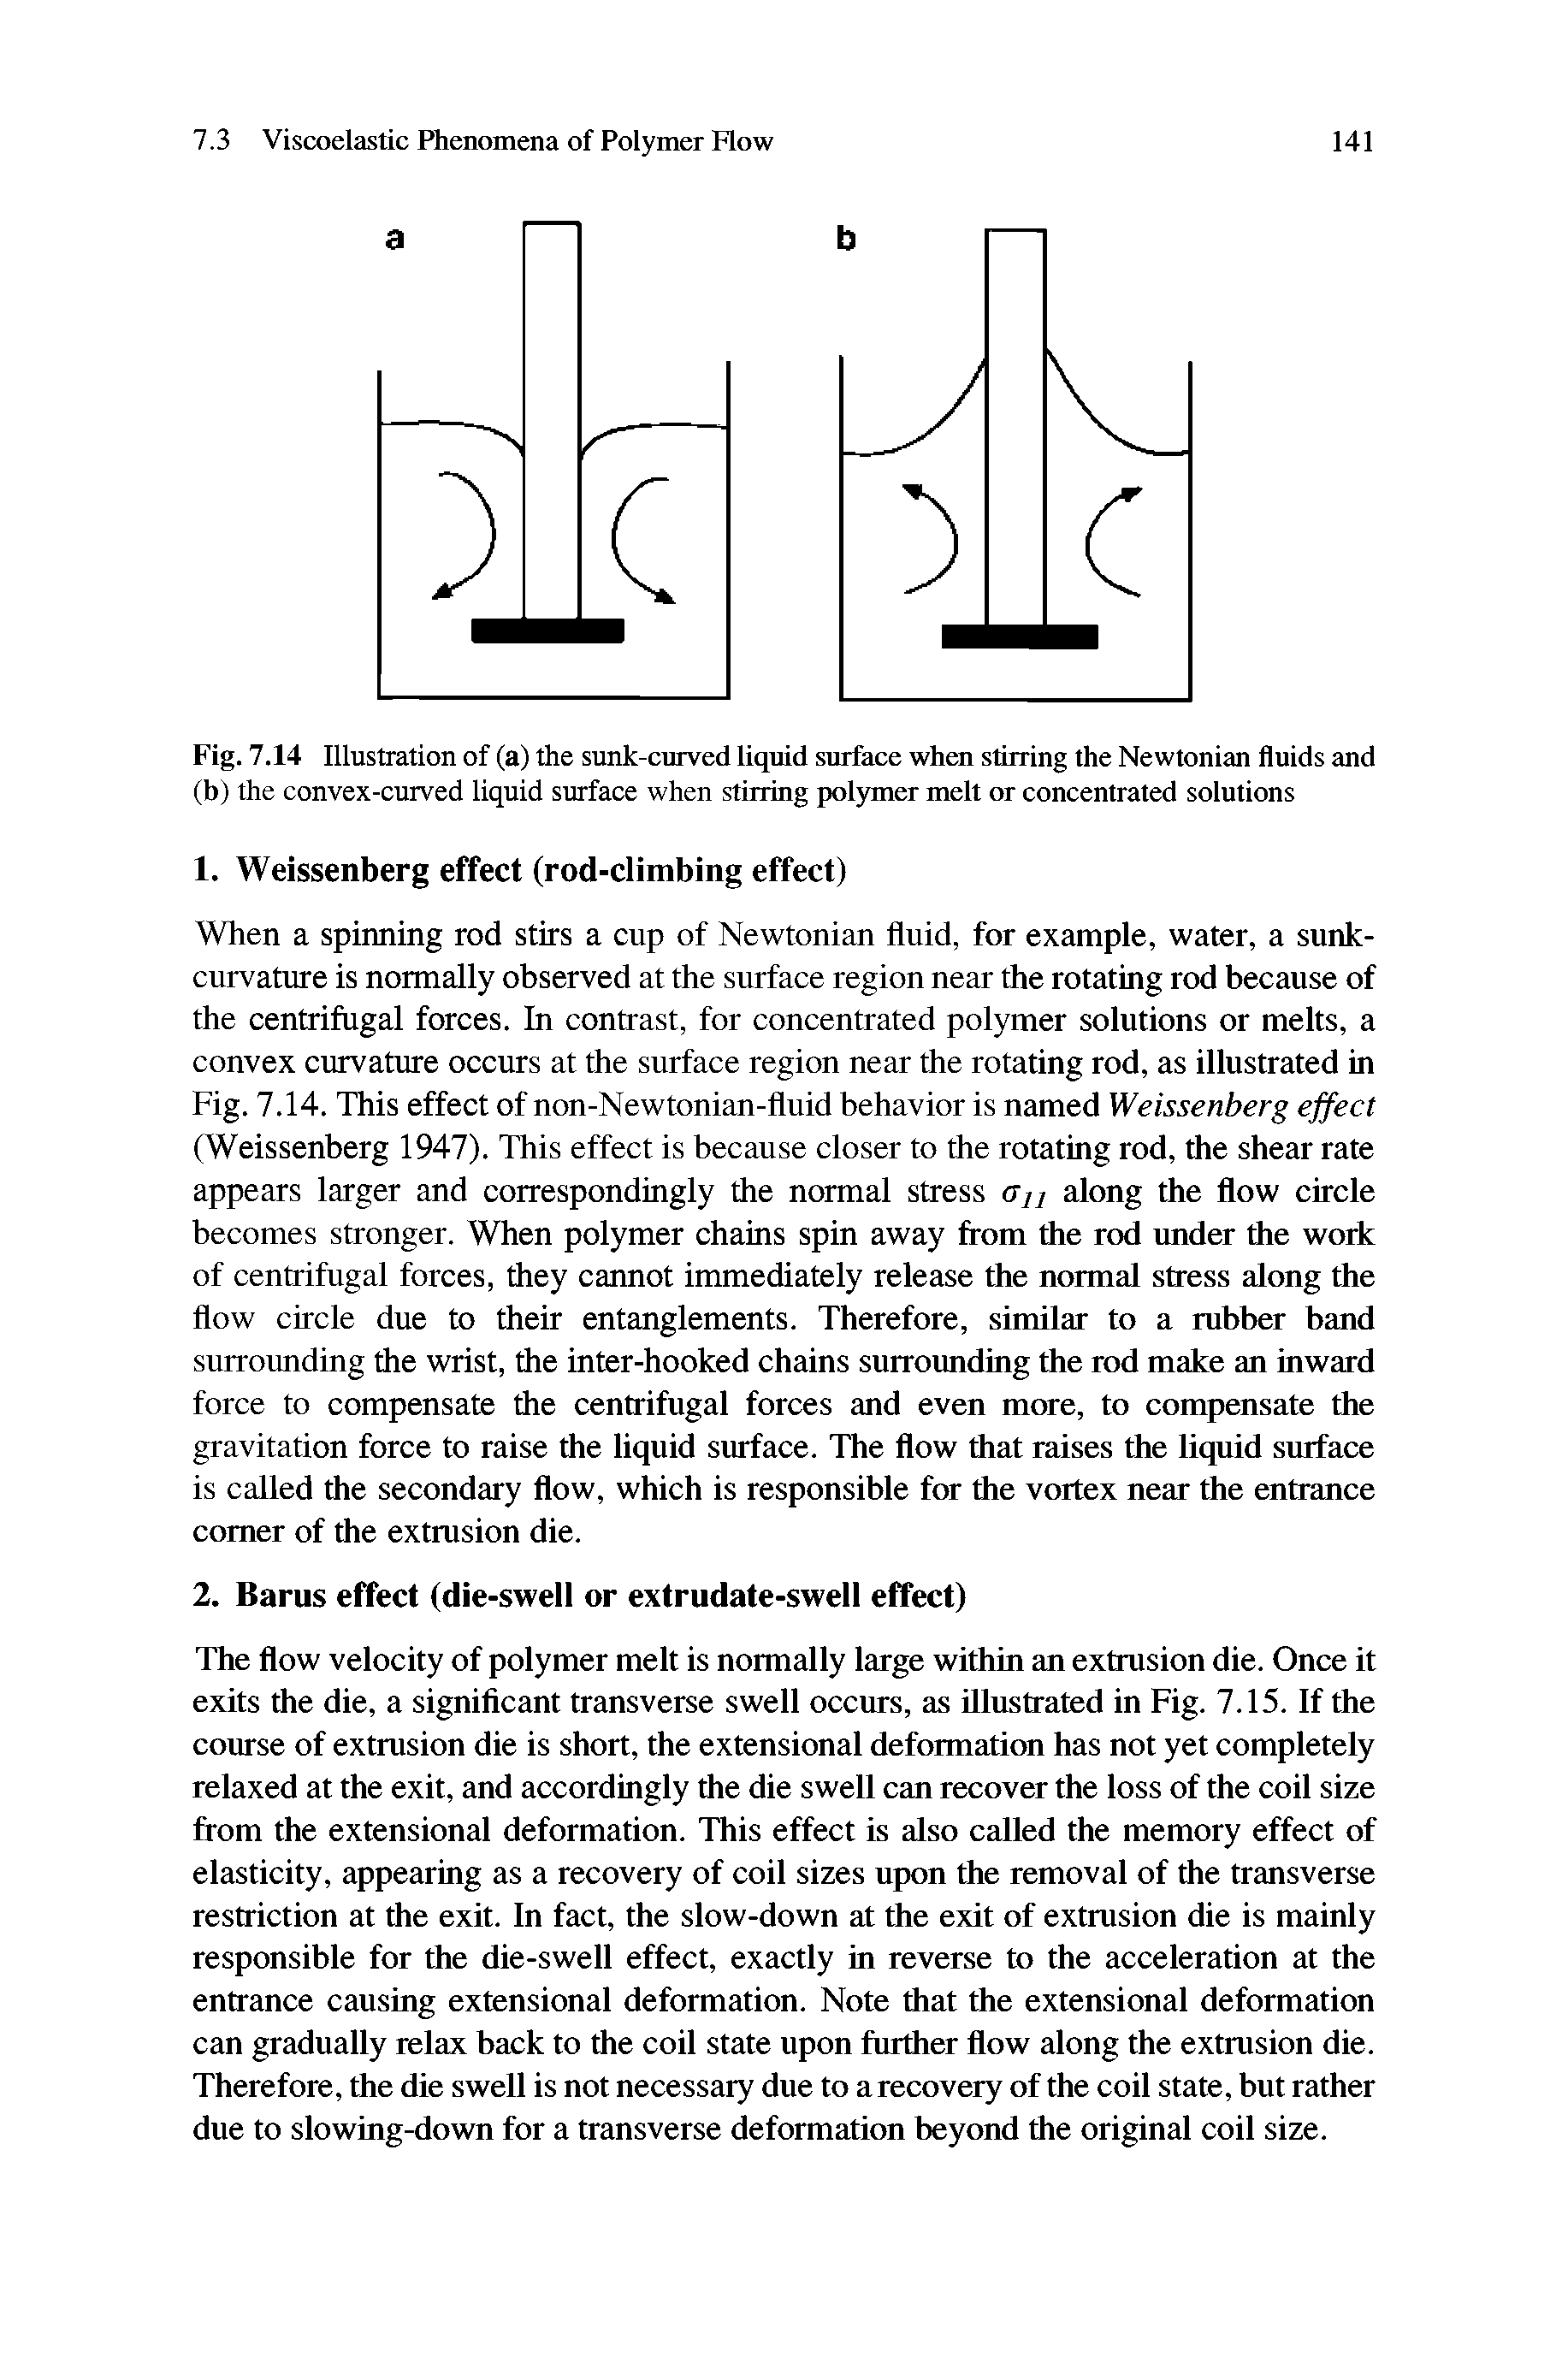 Fig. 7.14 Illustration of (a) the sunk-curved liquid surface whai stirring the Newtonian fluids and (b) the convex-curved liquid surface when stirring polymer melt or concentrated solutions...